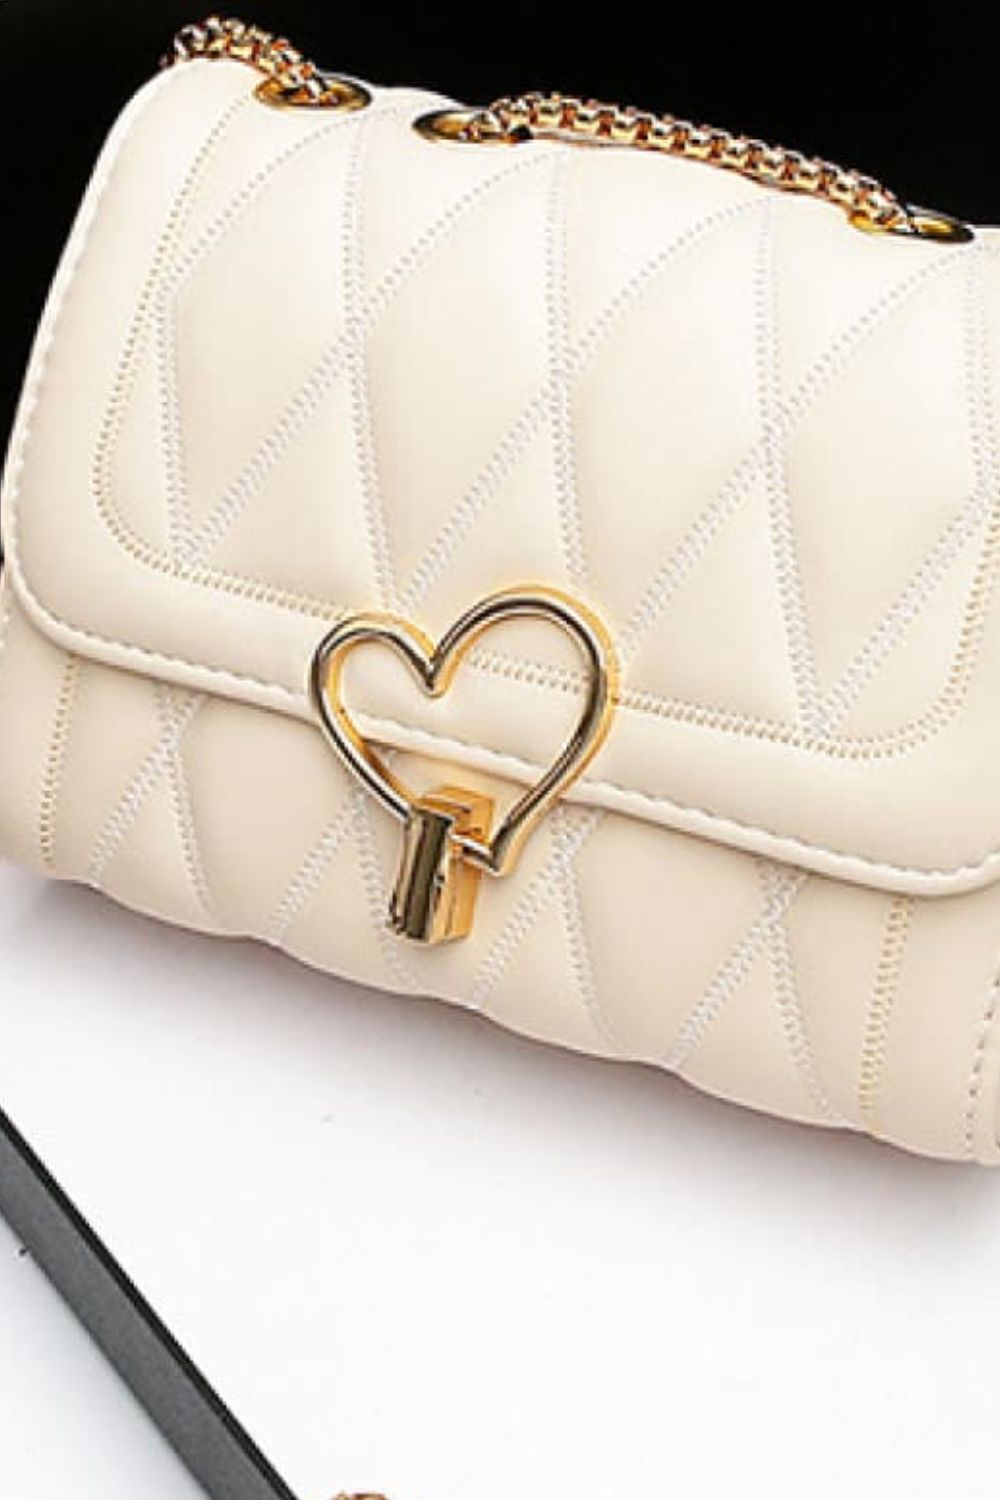 Antique White Her Style Heart Buckle PU Leather Crossbody Bag Handbags